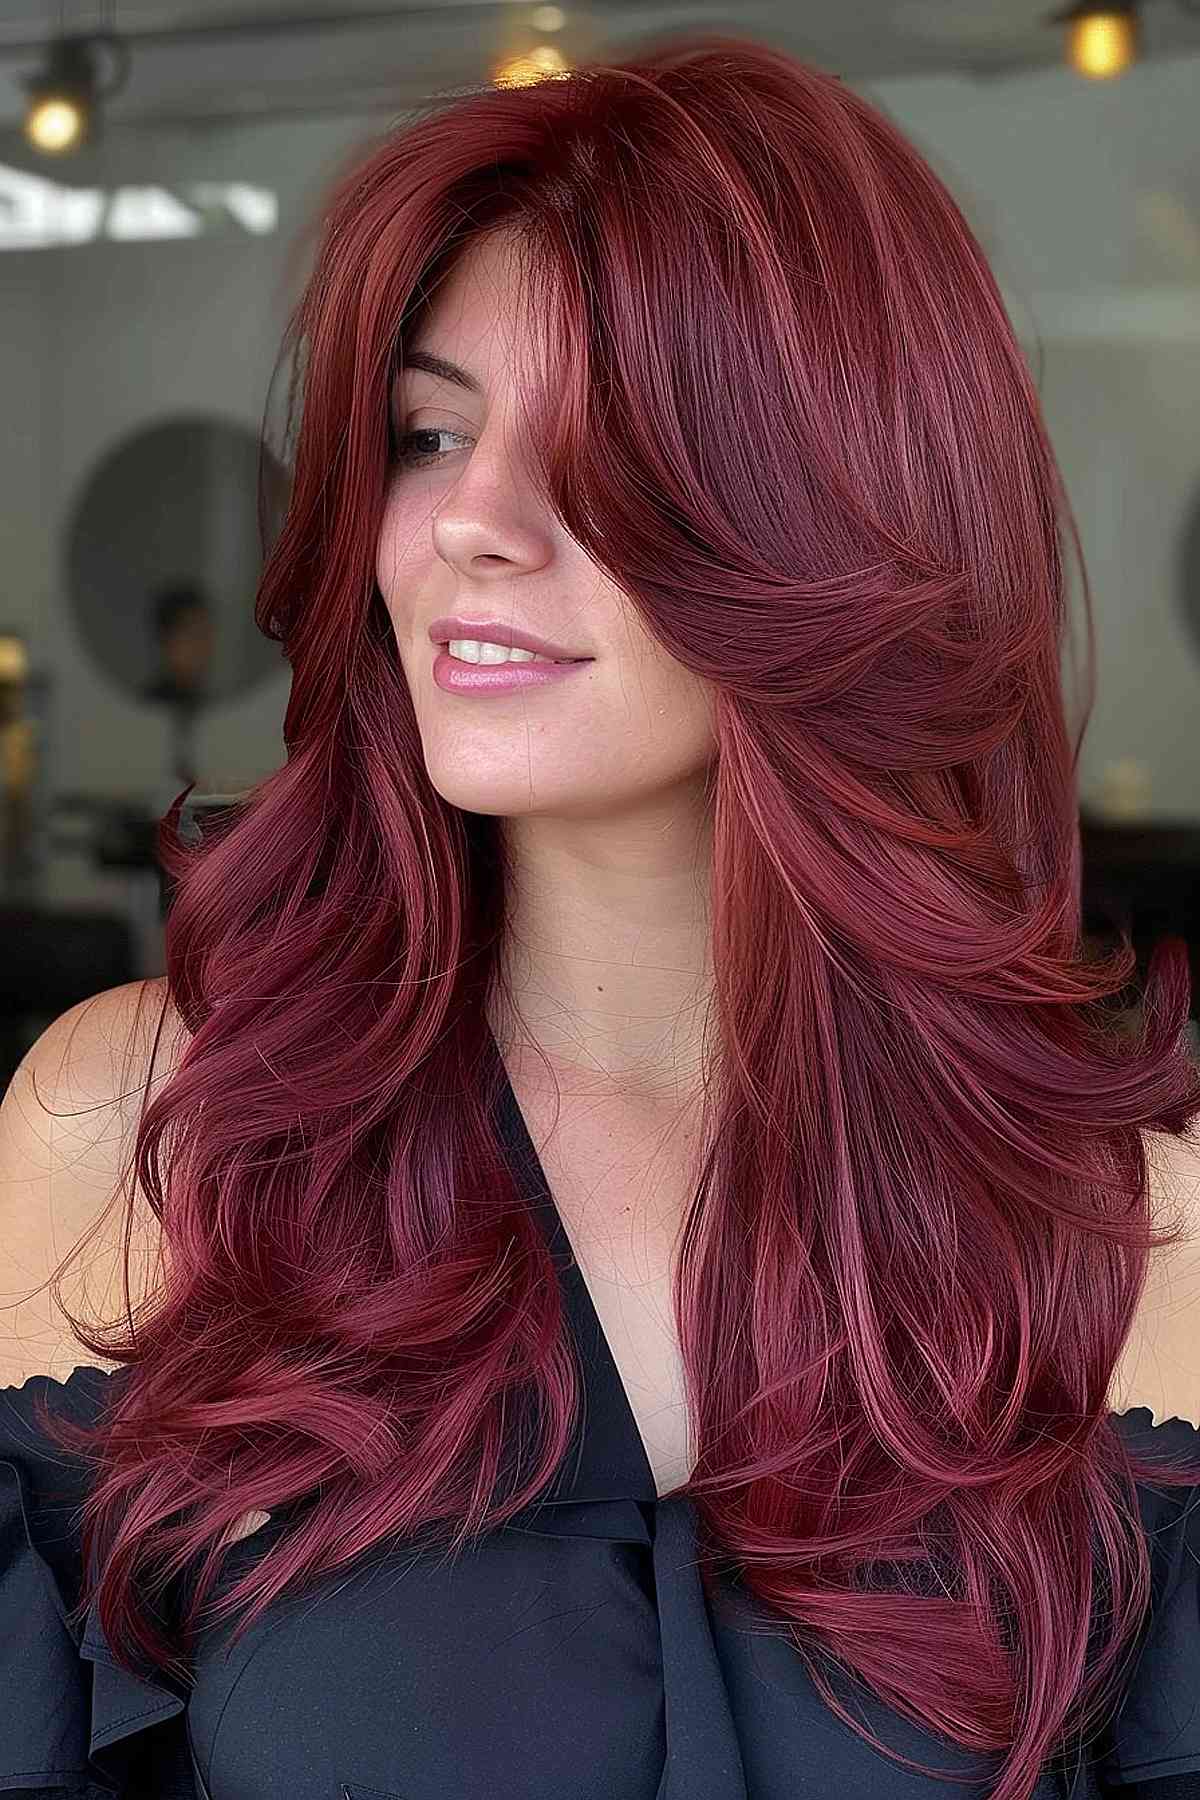 Mid-length cherry red hair with subtle gradient, perfect for dense, wavy textures.